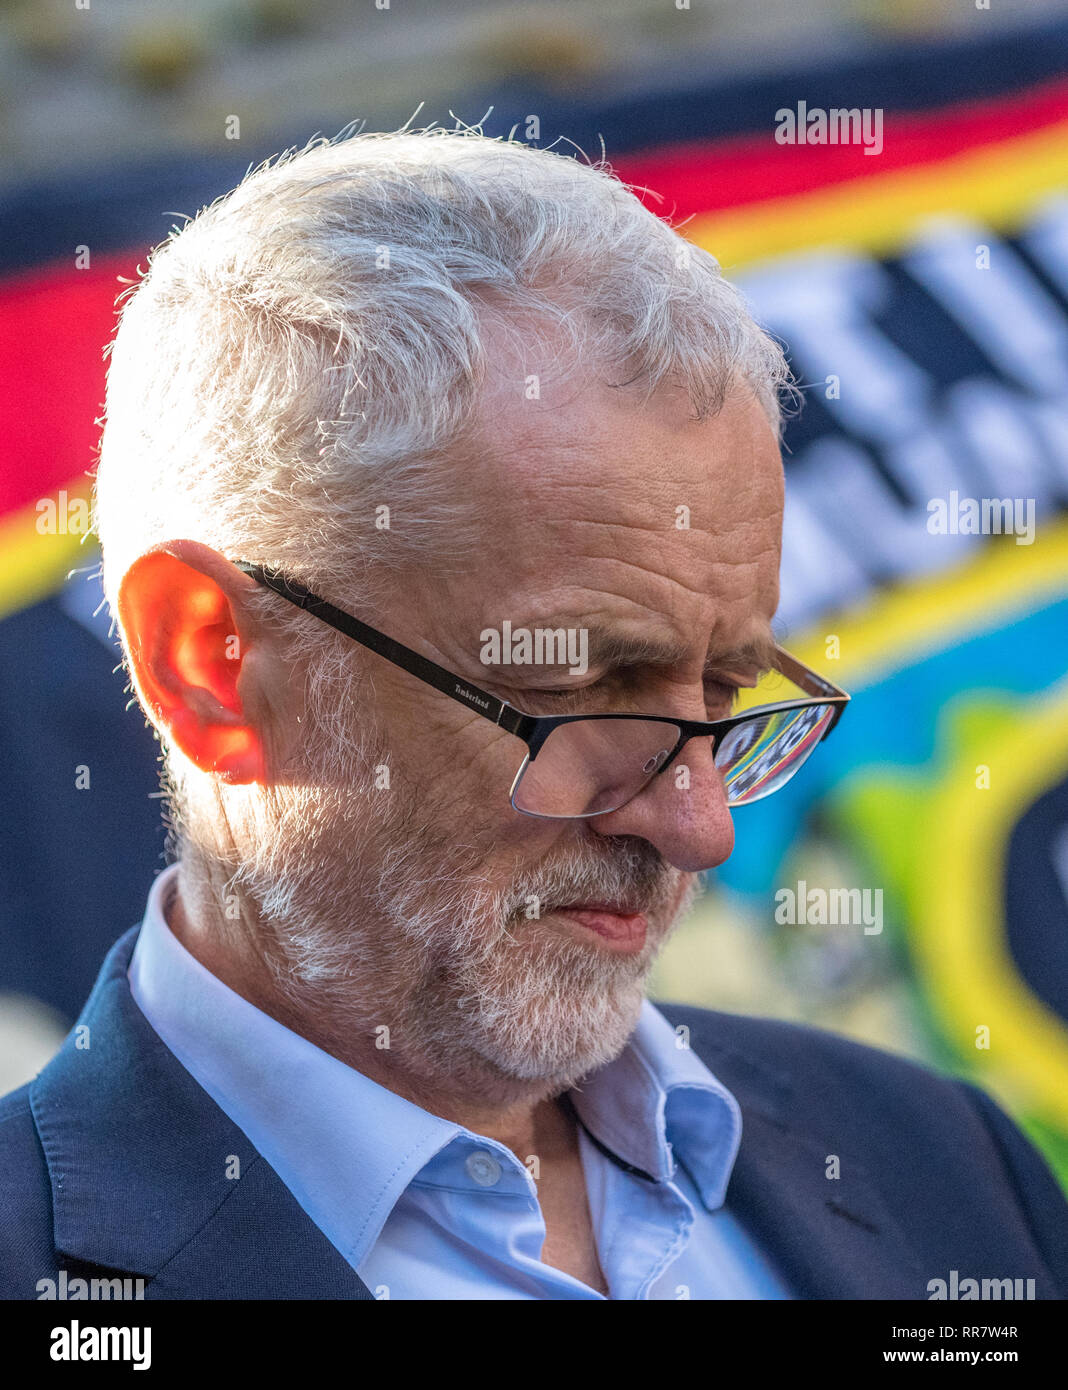 Jeremy Corbyn M.P. leader of the Labour Party speaking on labour's plan for a fairer Britain at a rally in Beeston, Nottingham Stock Photo